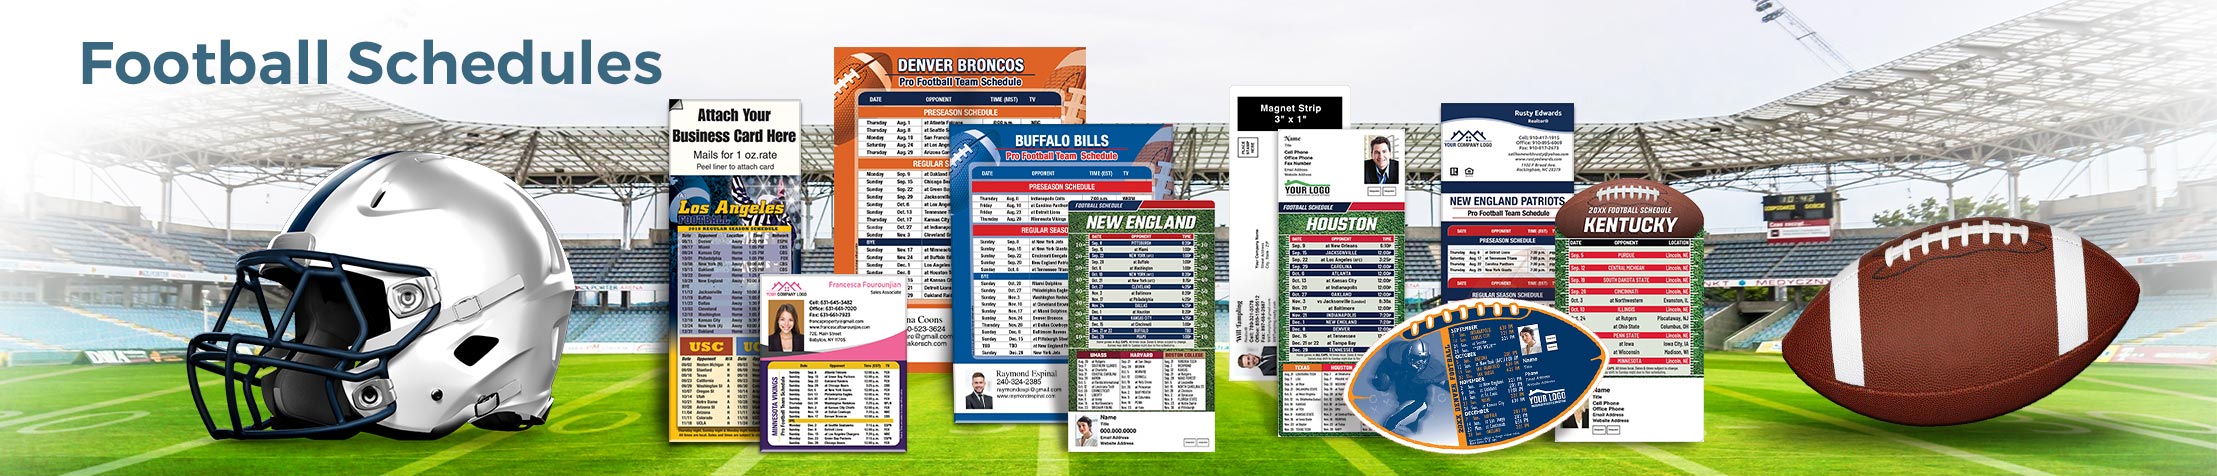 Keller Williams Real Estate Football Schedules - KW approved vendor personalized football schedules | BestPrintBuy.com